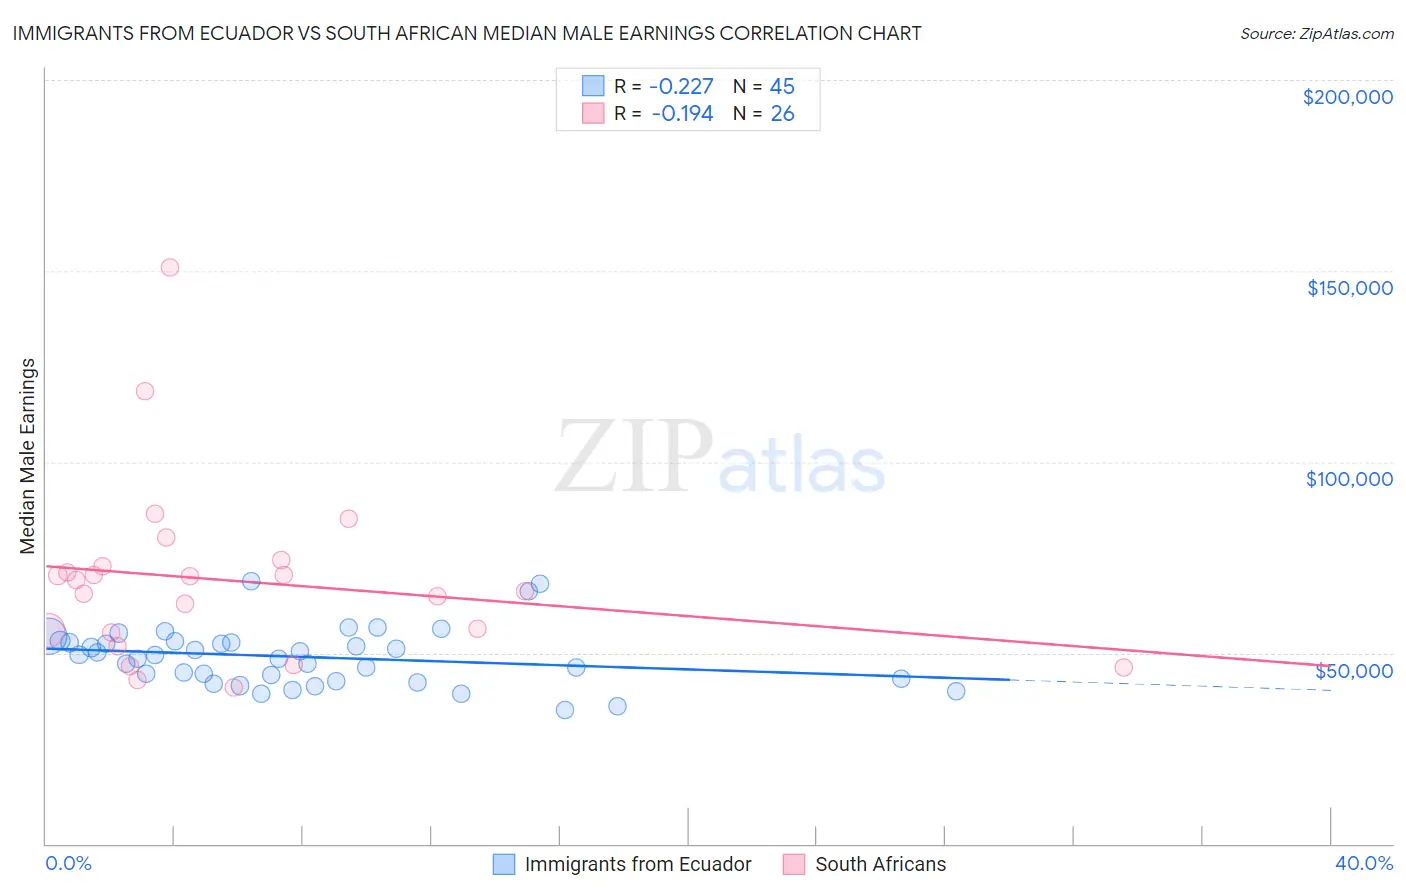 Immigrants from Ecuador vs South African Median Male Earnings